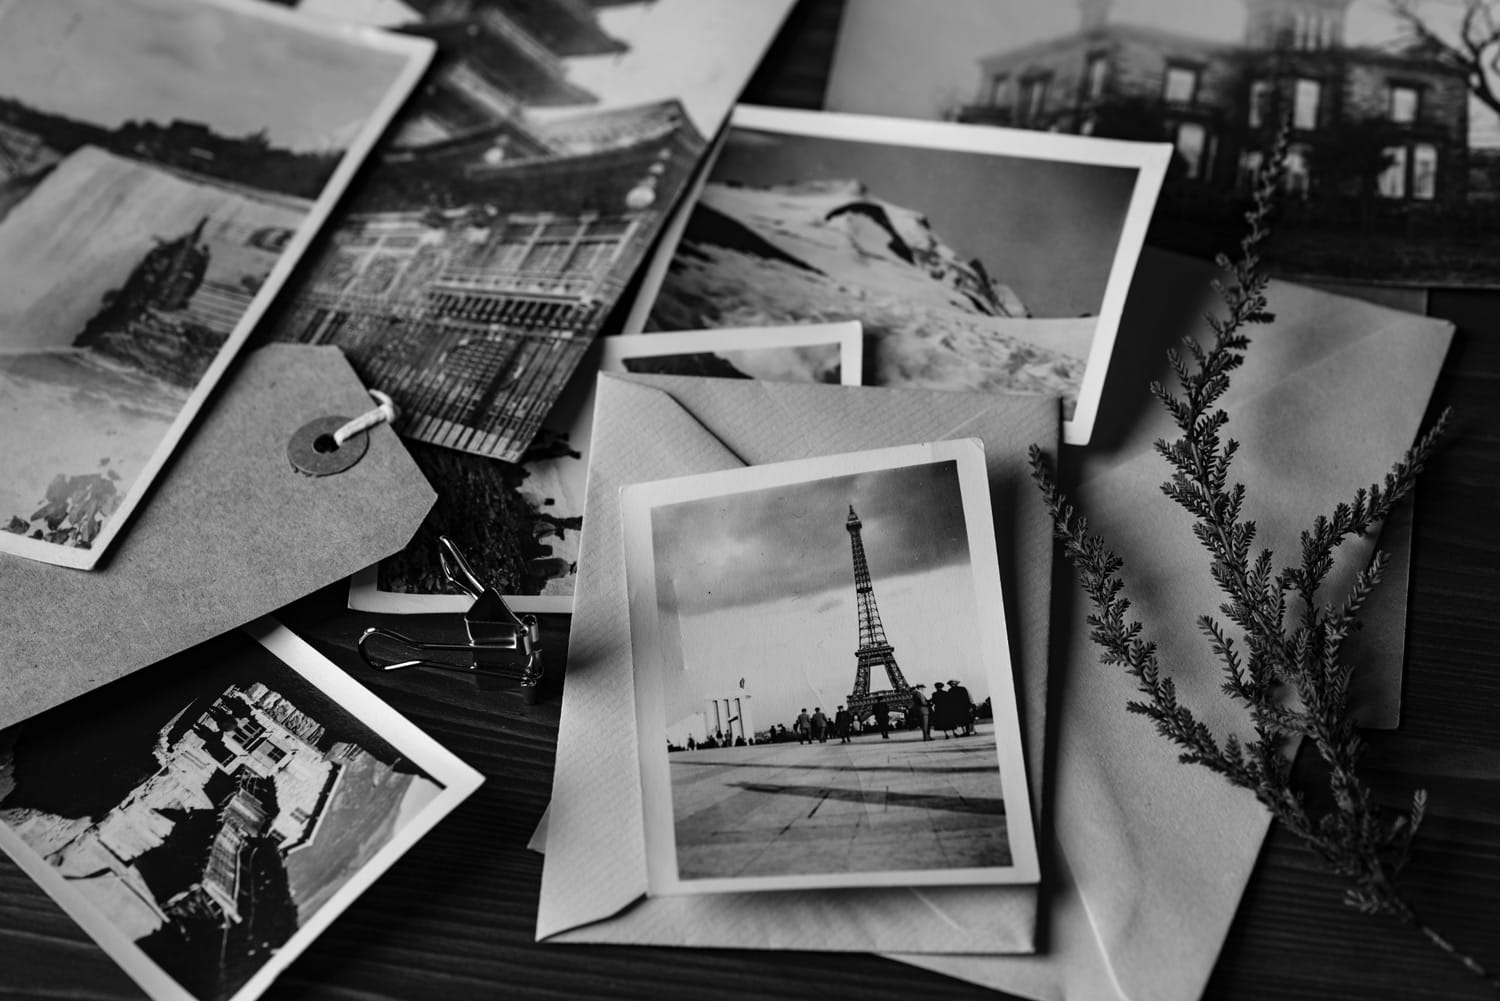 Photo of old photos and post cards on the table